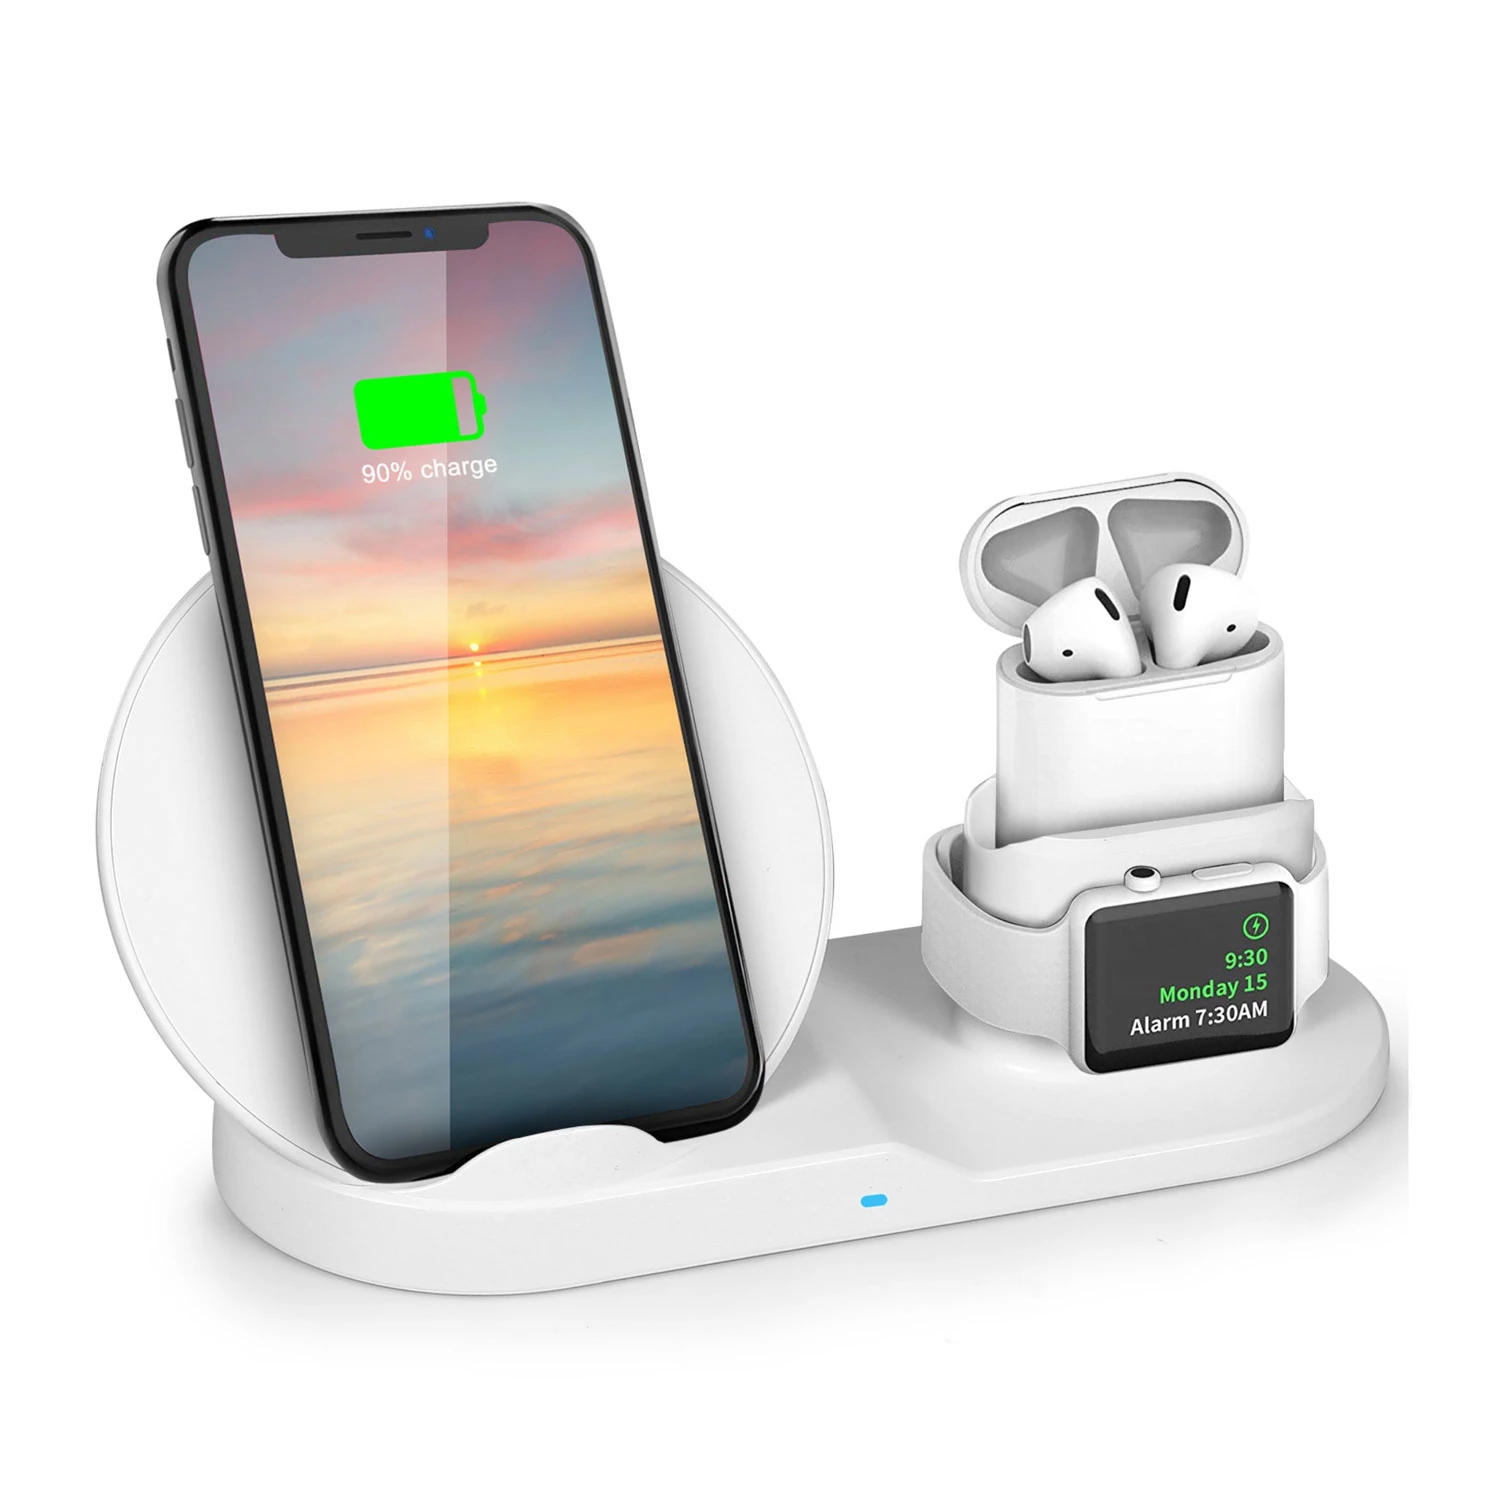 10W Fast Wireless Charger for iPhone, iWatch, AirPods - Fits iPhone 11/11Pro/XS/XR/MAX/X/8 Plus/8, S